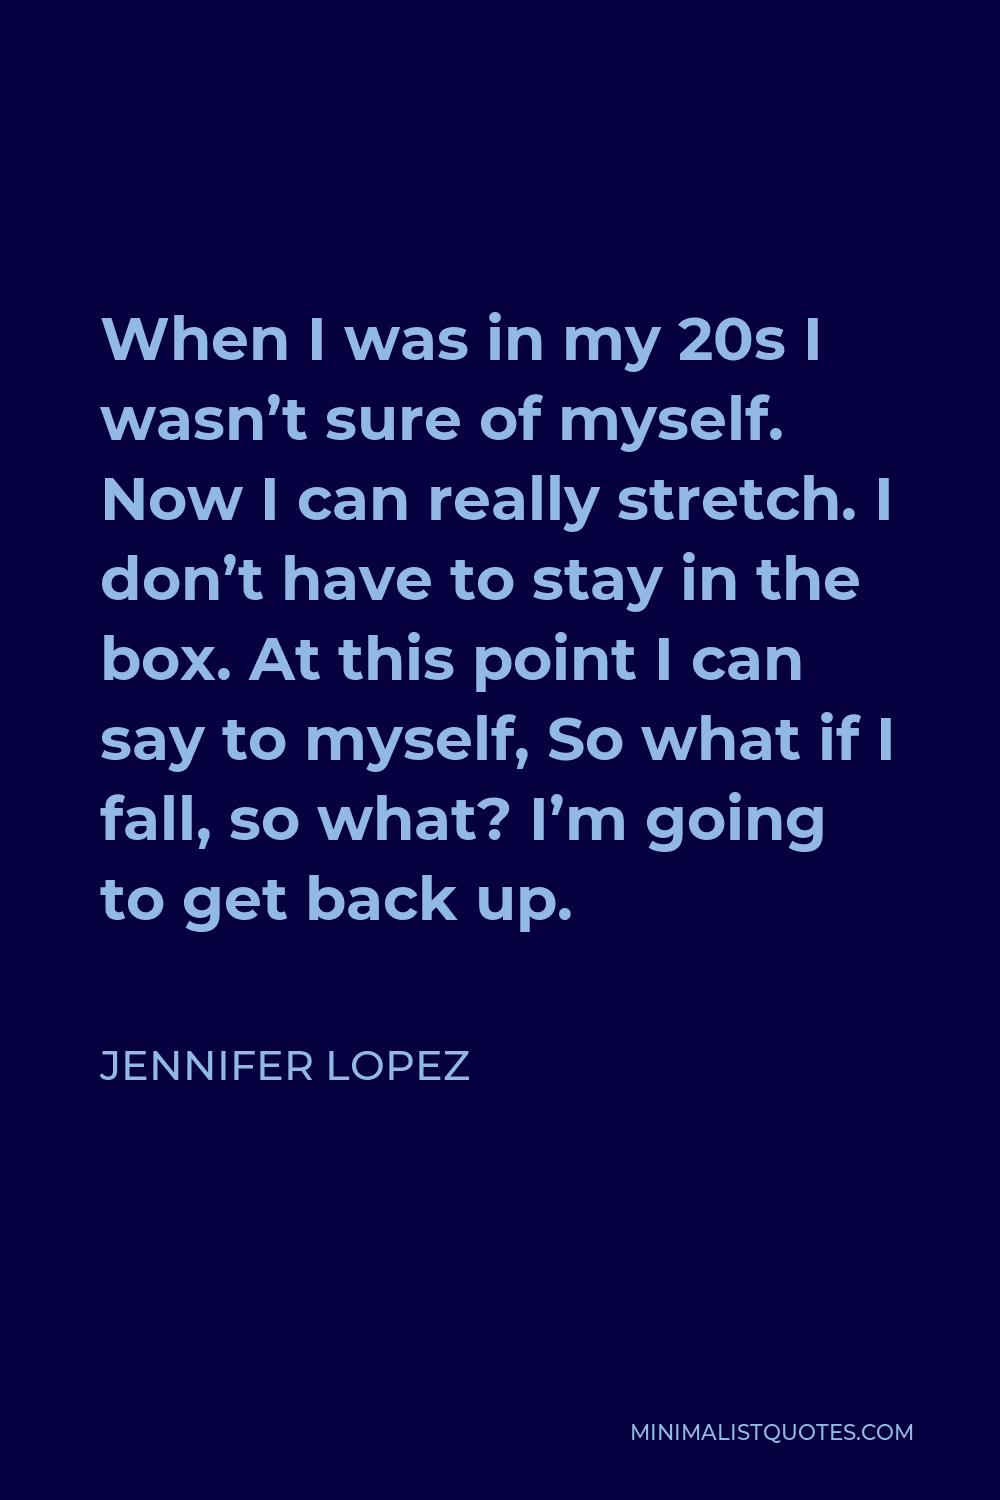 Jennifer Lopez Quote - When I was in my 20s I wasn’t sure of myself. Now I can really stretch. I don’t have to stay in the box. At this point I can say to myself, So what if I fall, so what? I’m going to get back up.